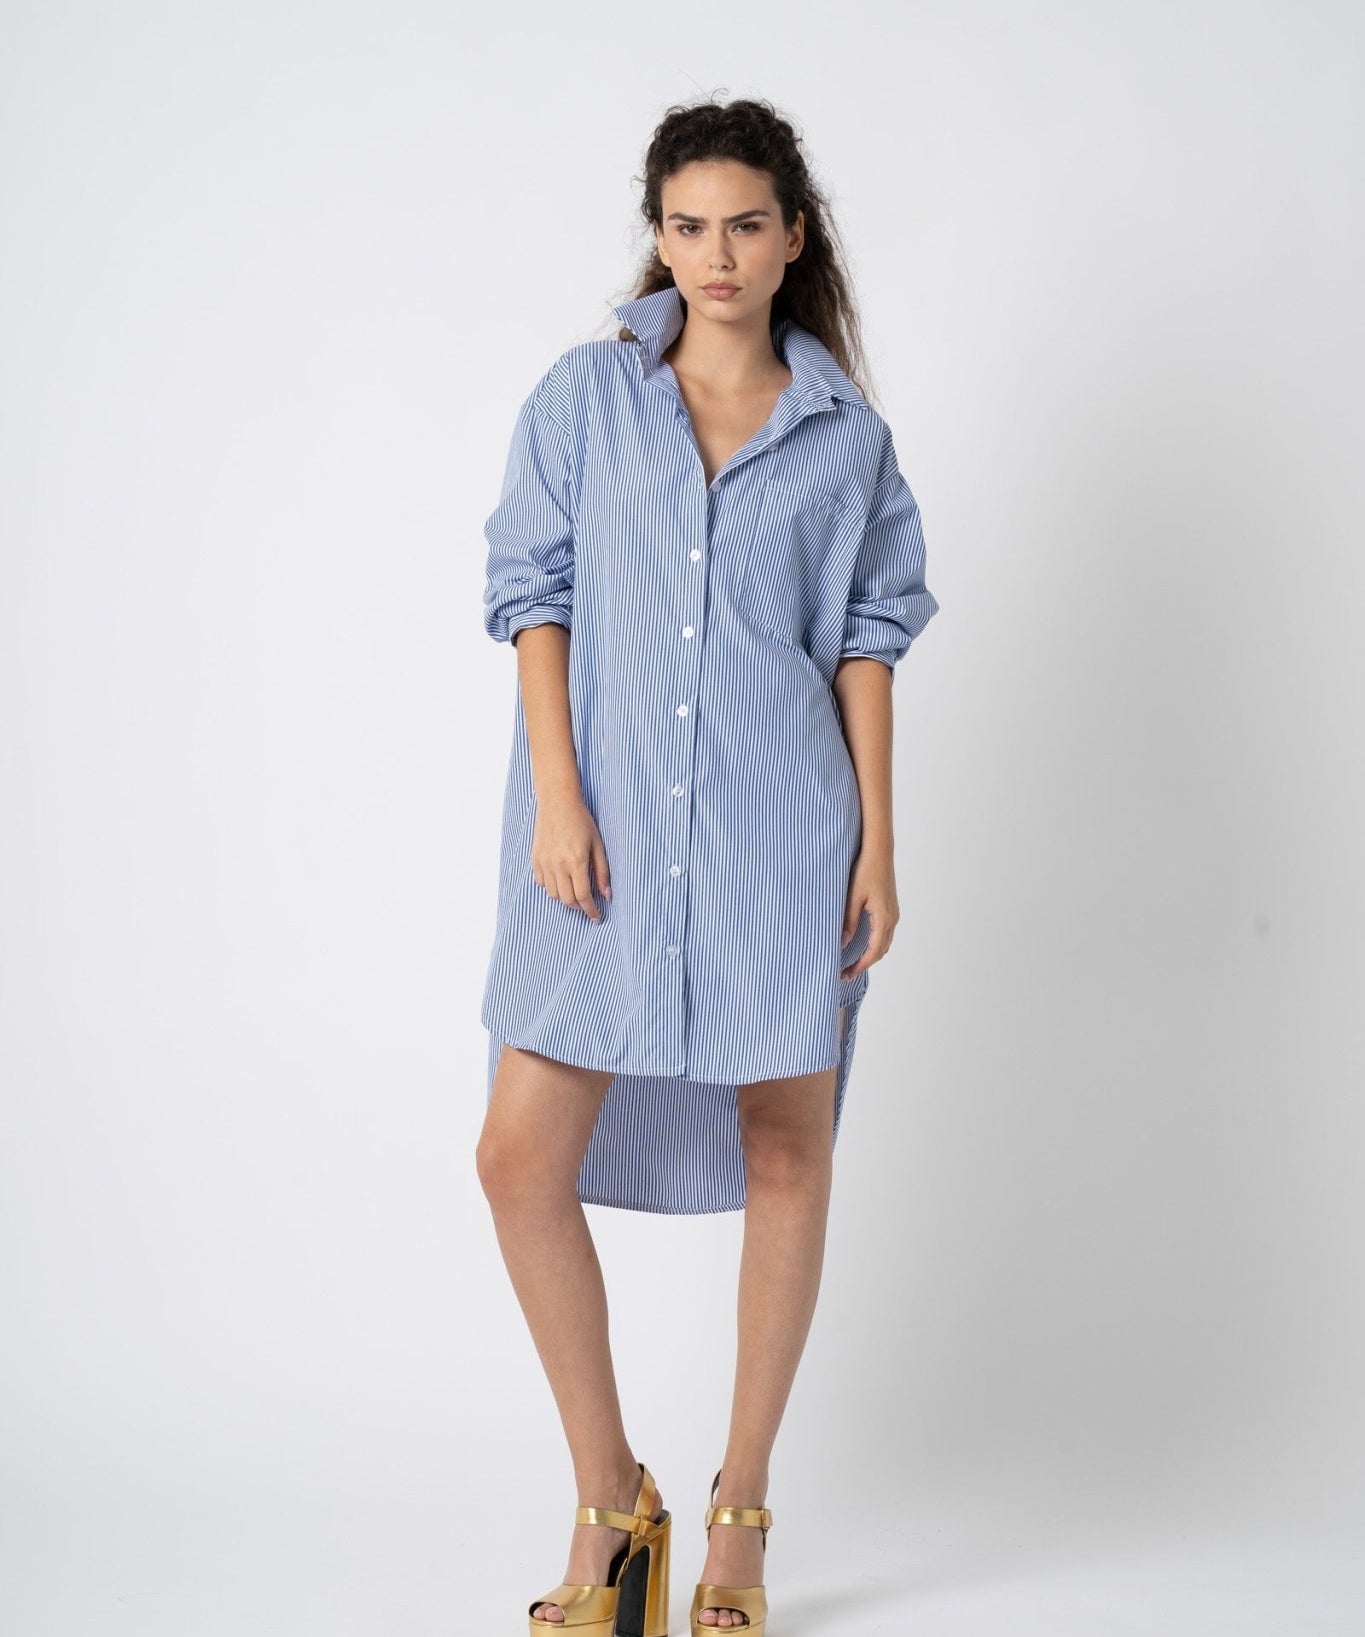 Long Striped Shirtdress by Astrid - Blue Sky Fashions & Lingerie